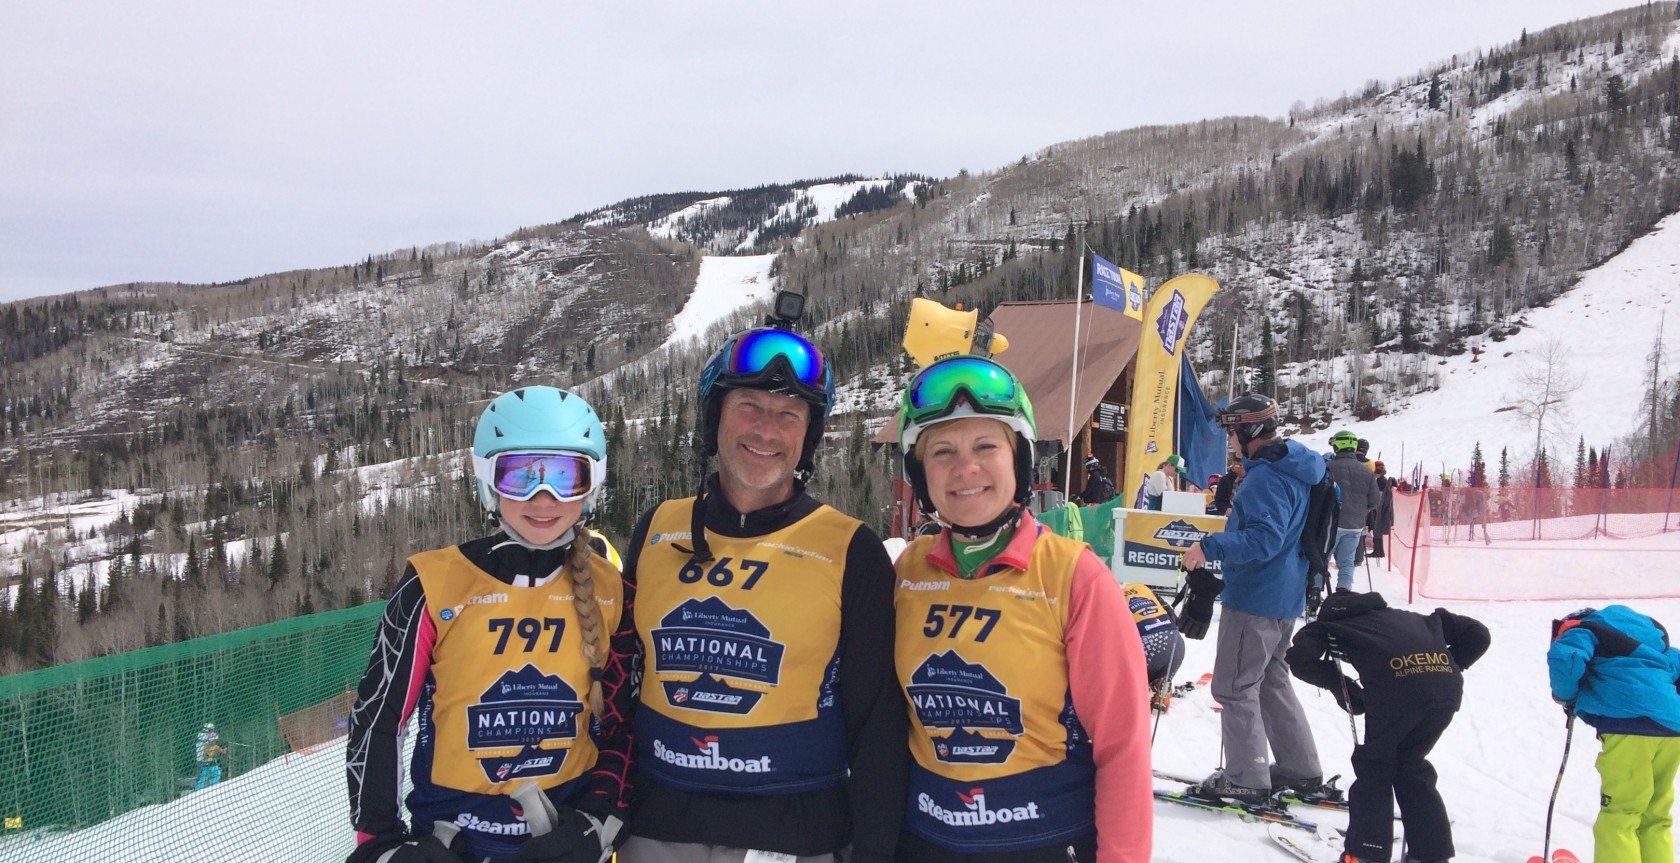 Ski racing dad Rudy Muto of Kutztown PA with his family at NASTAR Nationals 2017 in Steamboat Springs, CO.